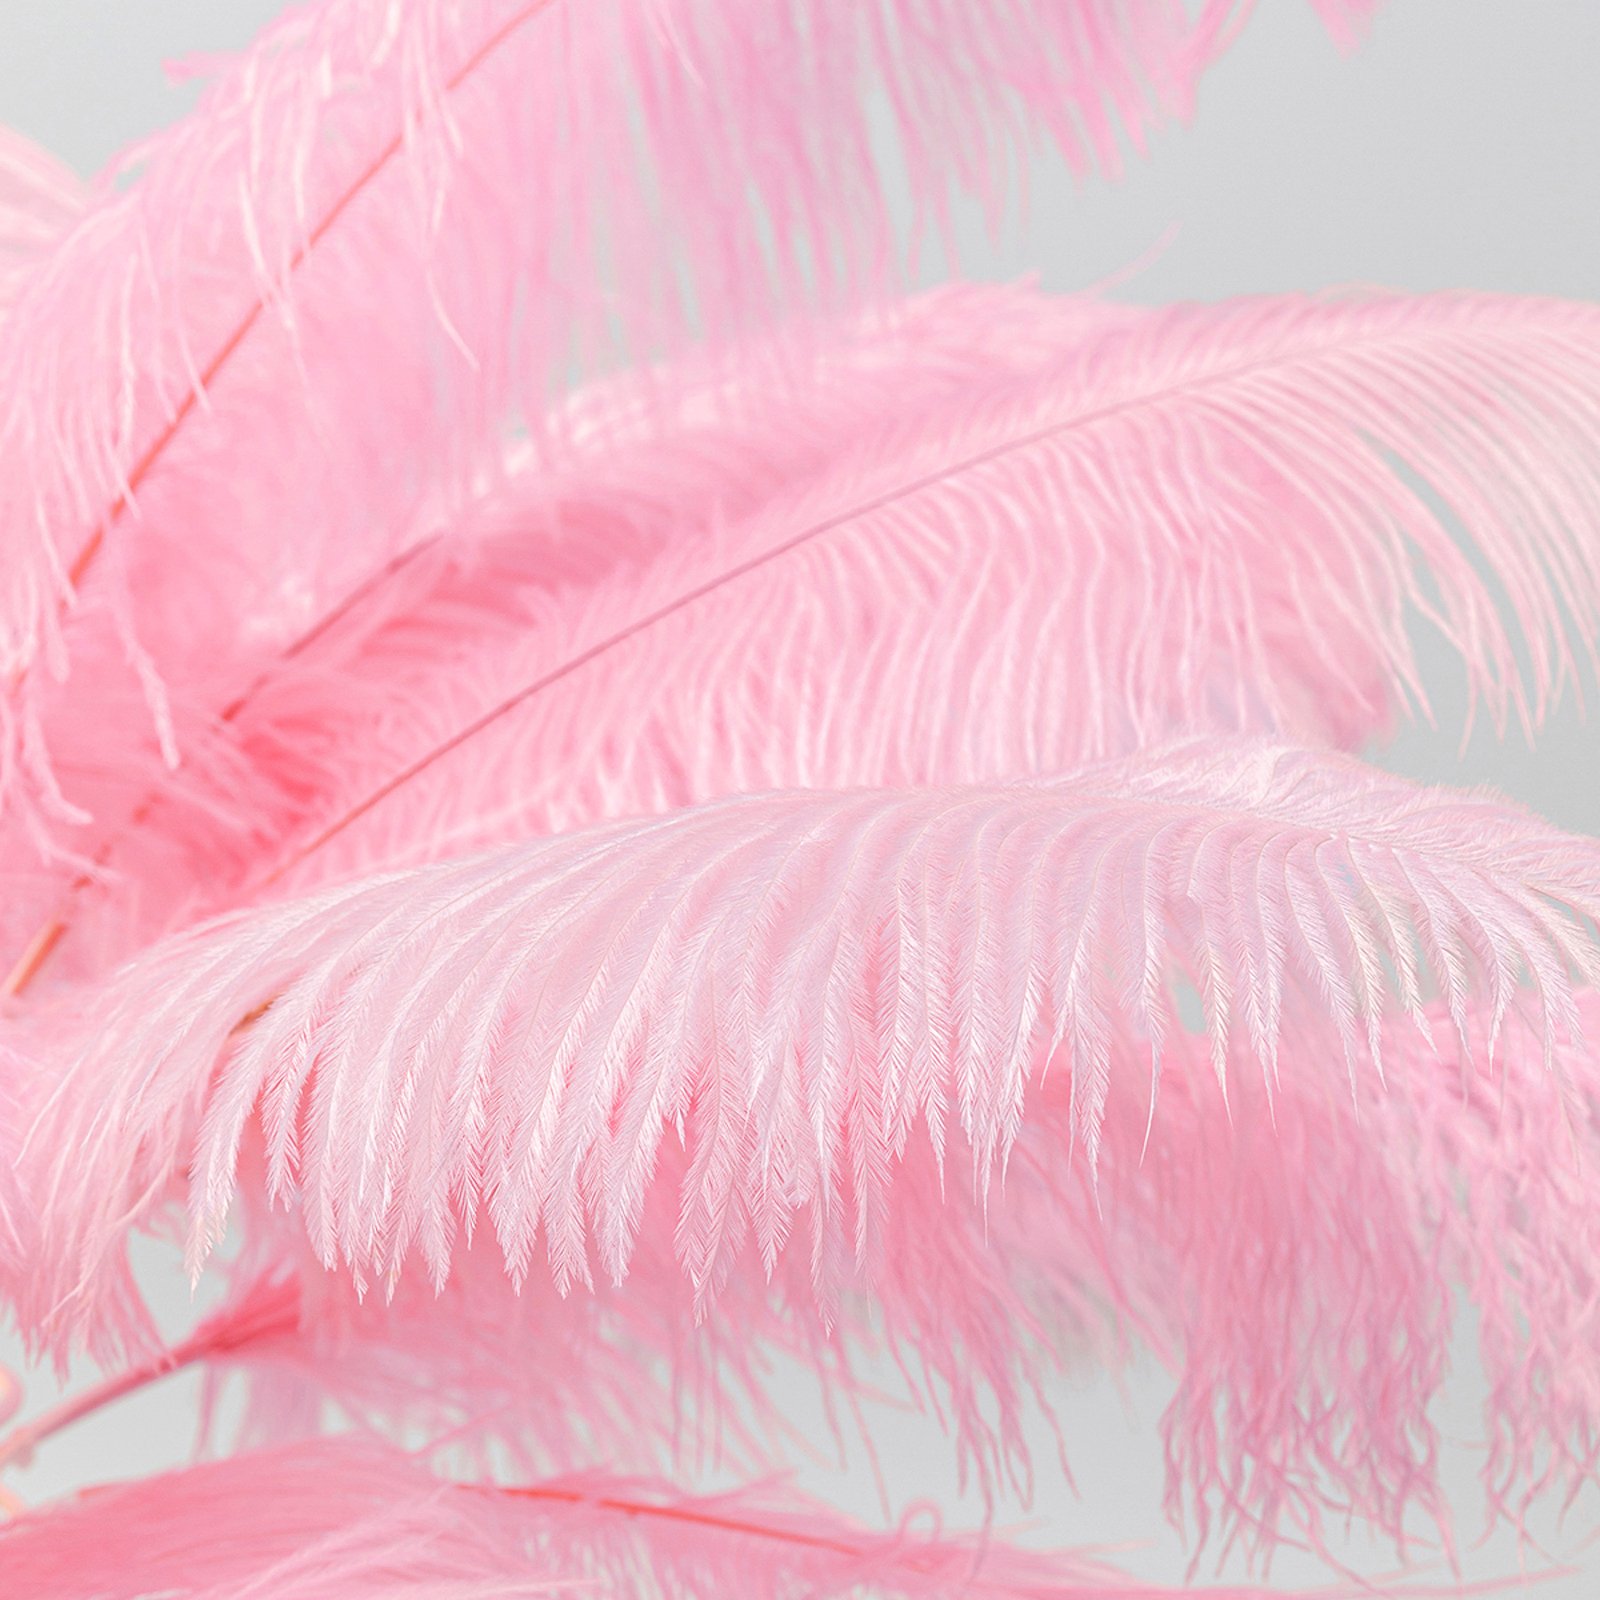 KARE Feather Palm lampe sur pied plumes, rose